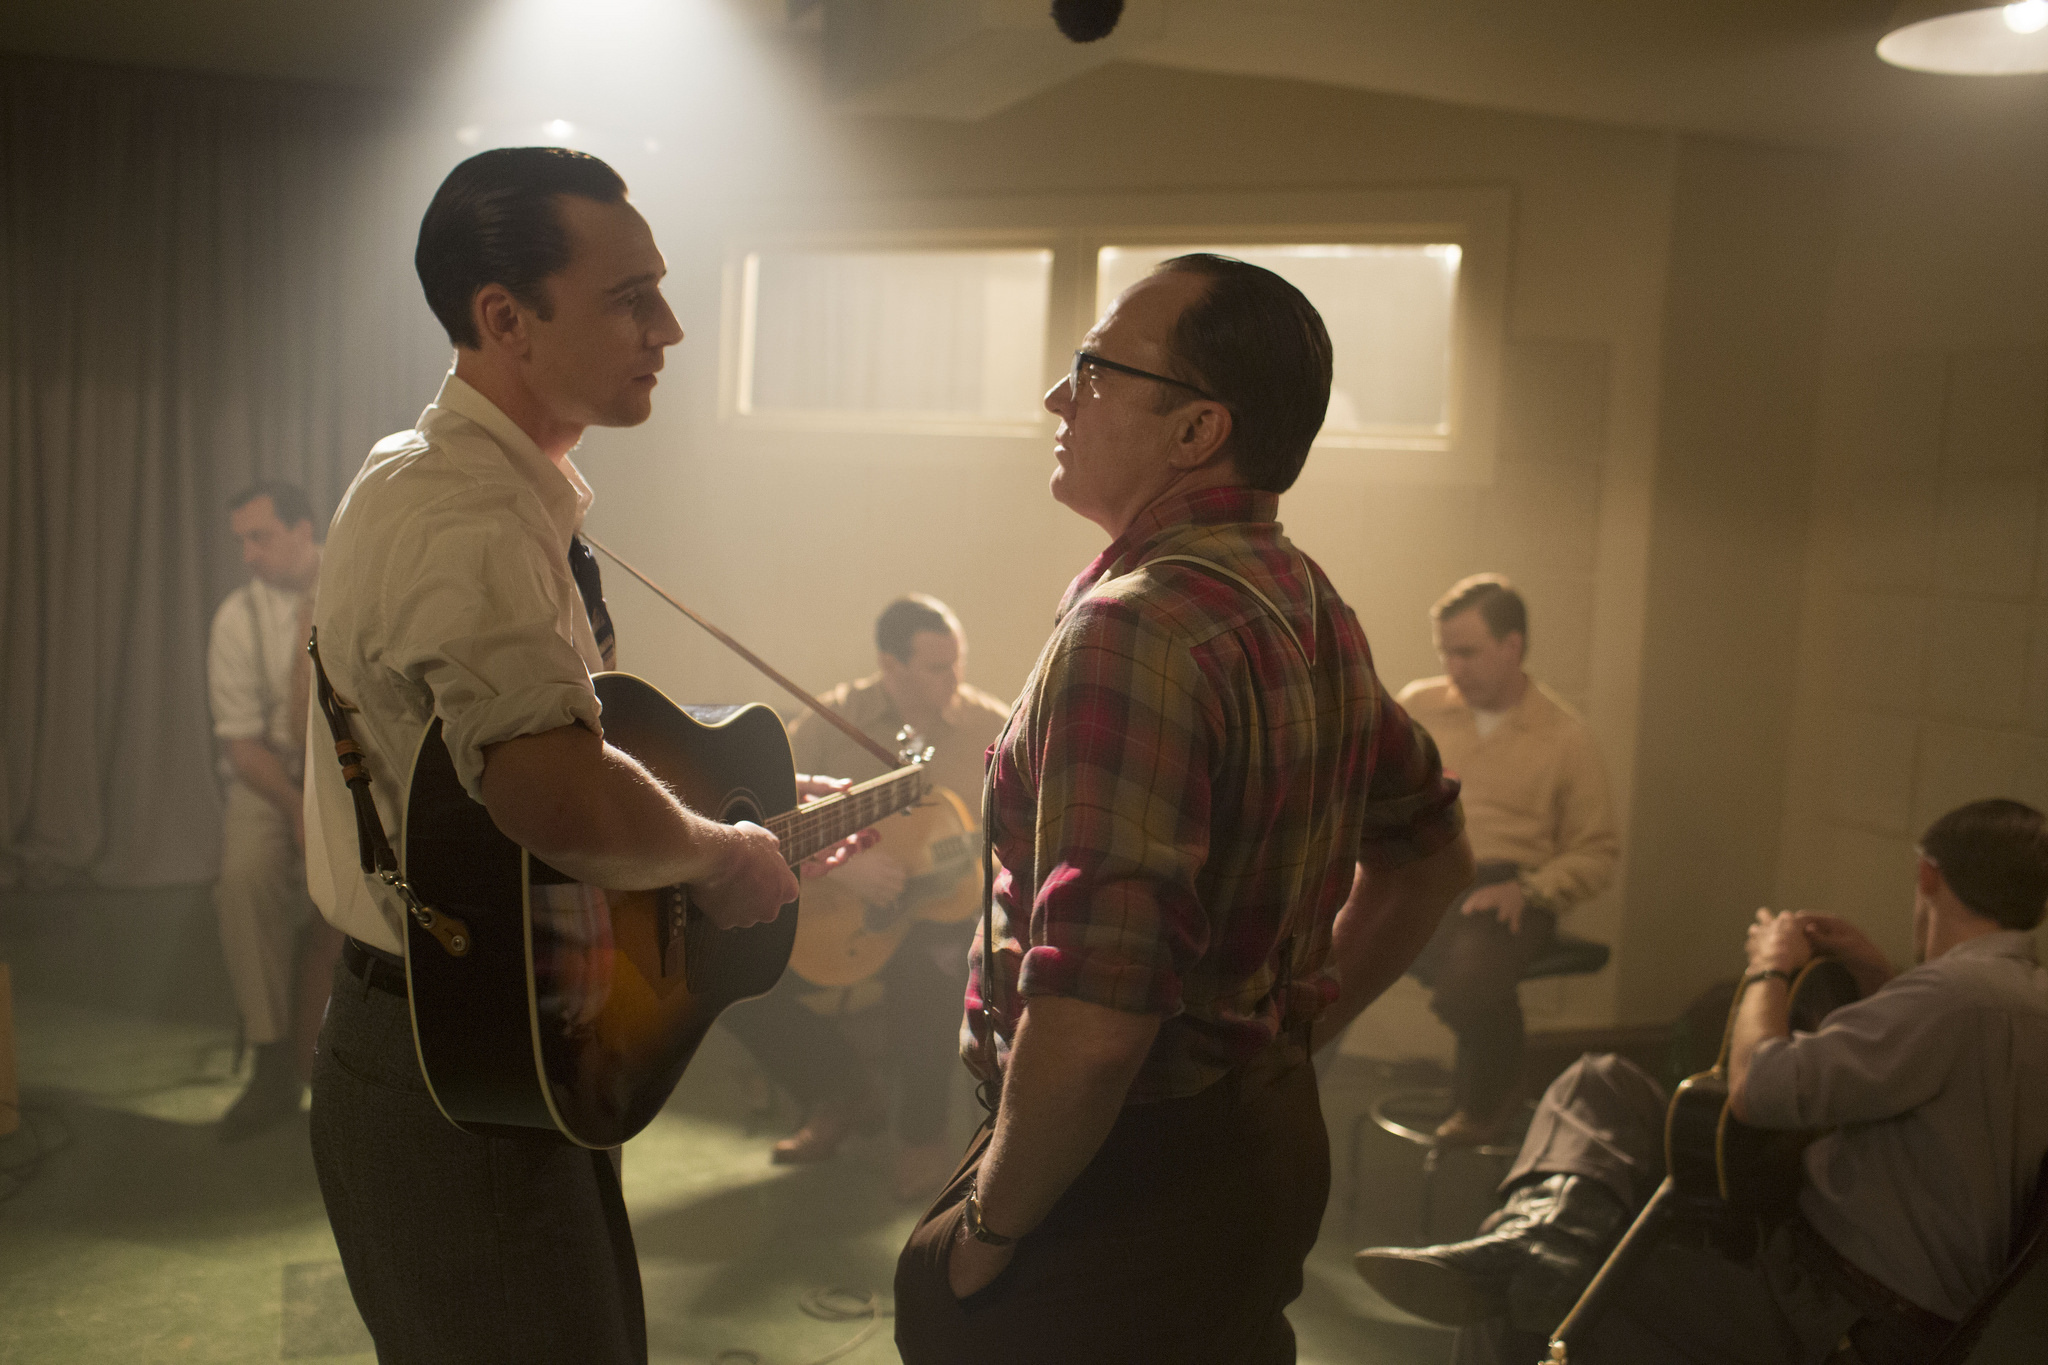 Actor playing a guitar looking at a man standing directly in front of him.  Rest of the actors in the band are sitting listening